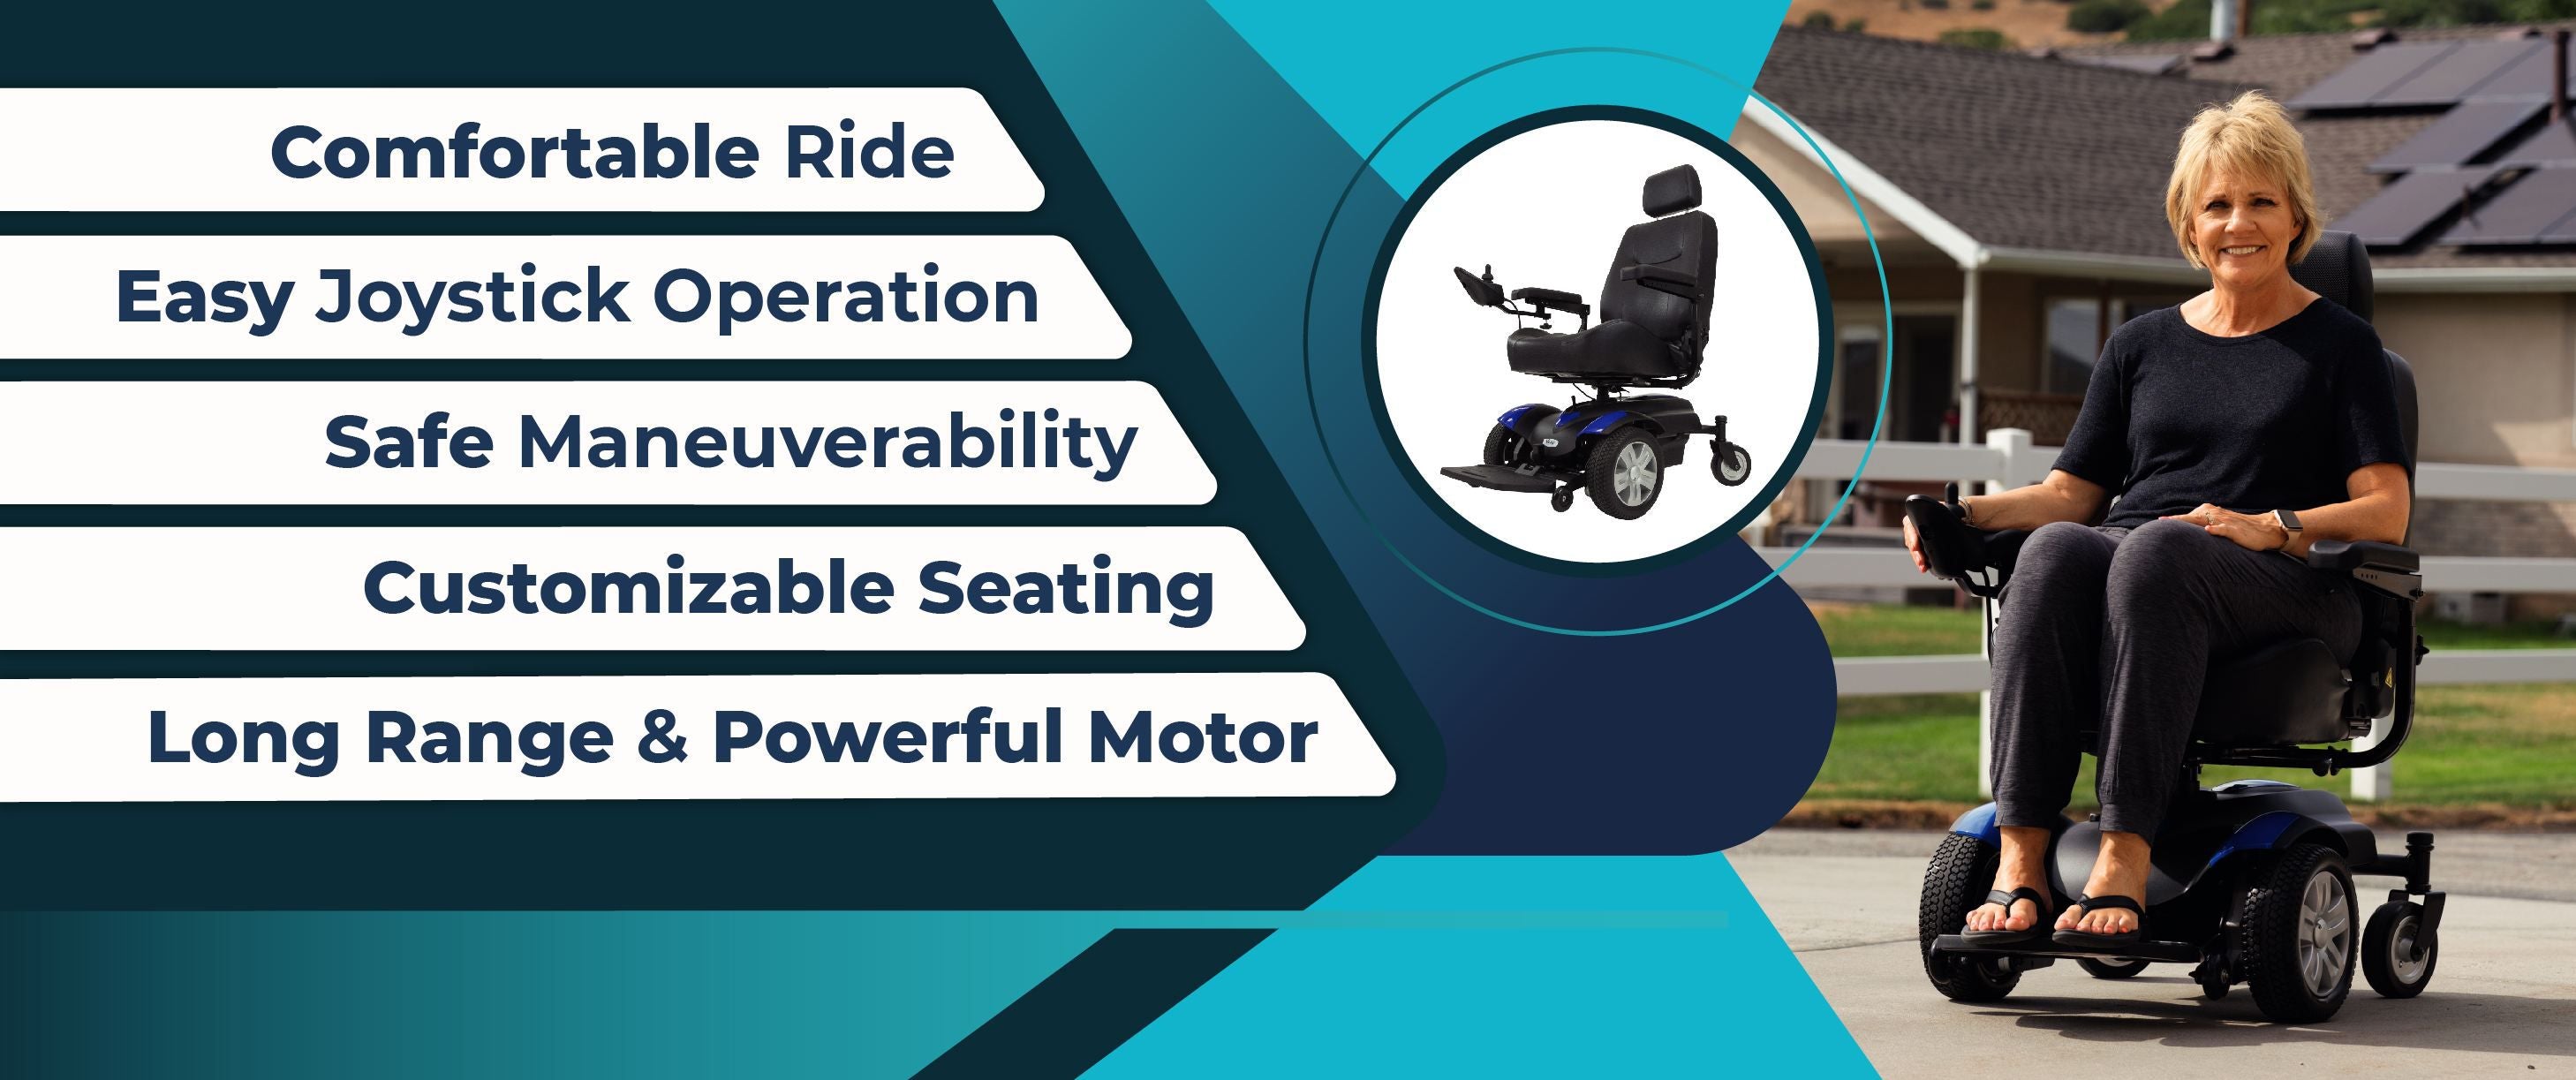 Vive Health - Electric Wheelchair Model V, 300lbs Weight Capacity - 15 Mile Range